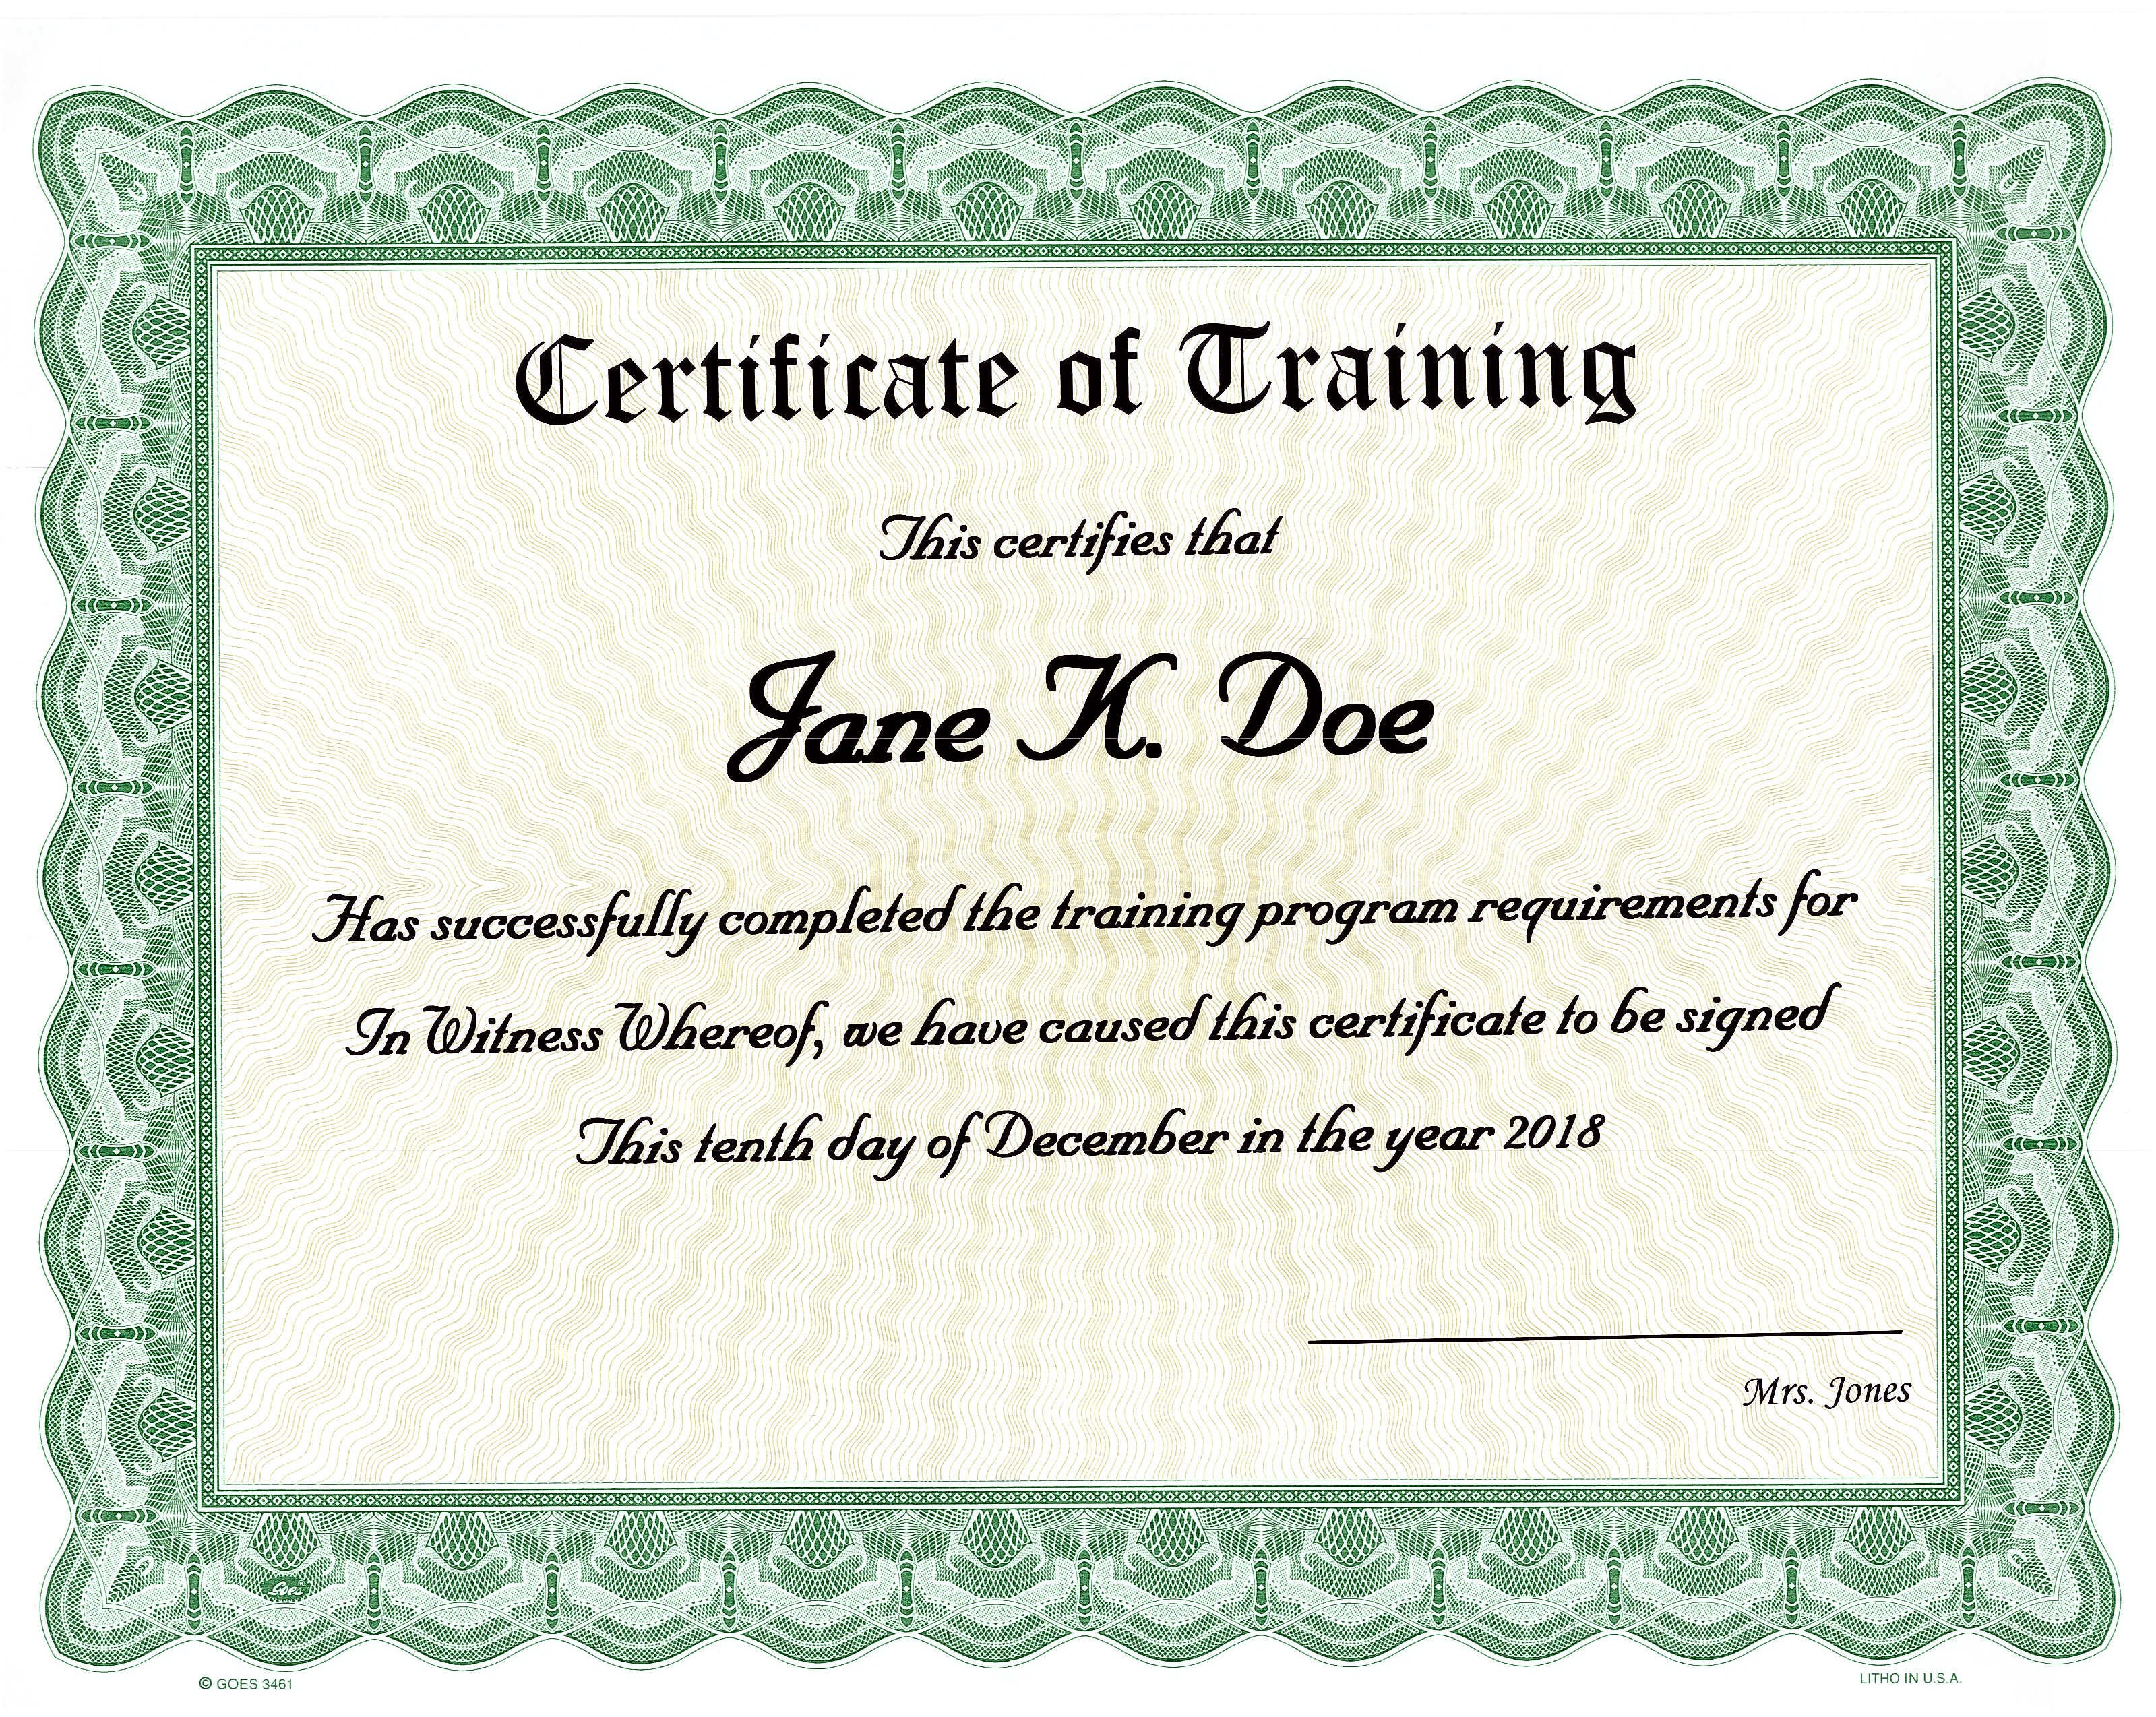 Need training certificates for a class, school, or seminar? Bestow a tangible reward. We'll custom print your unique award criteria onto beautiful, Goes templates and ship right away for distribution.